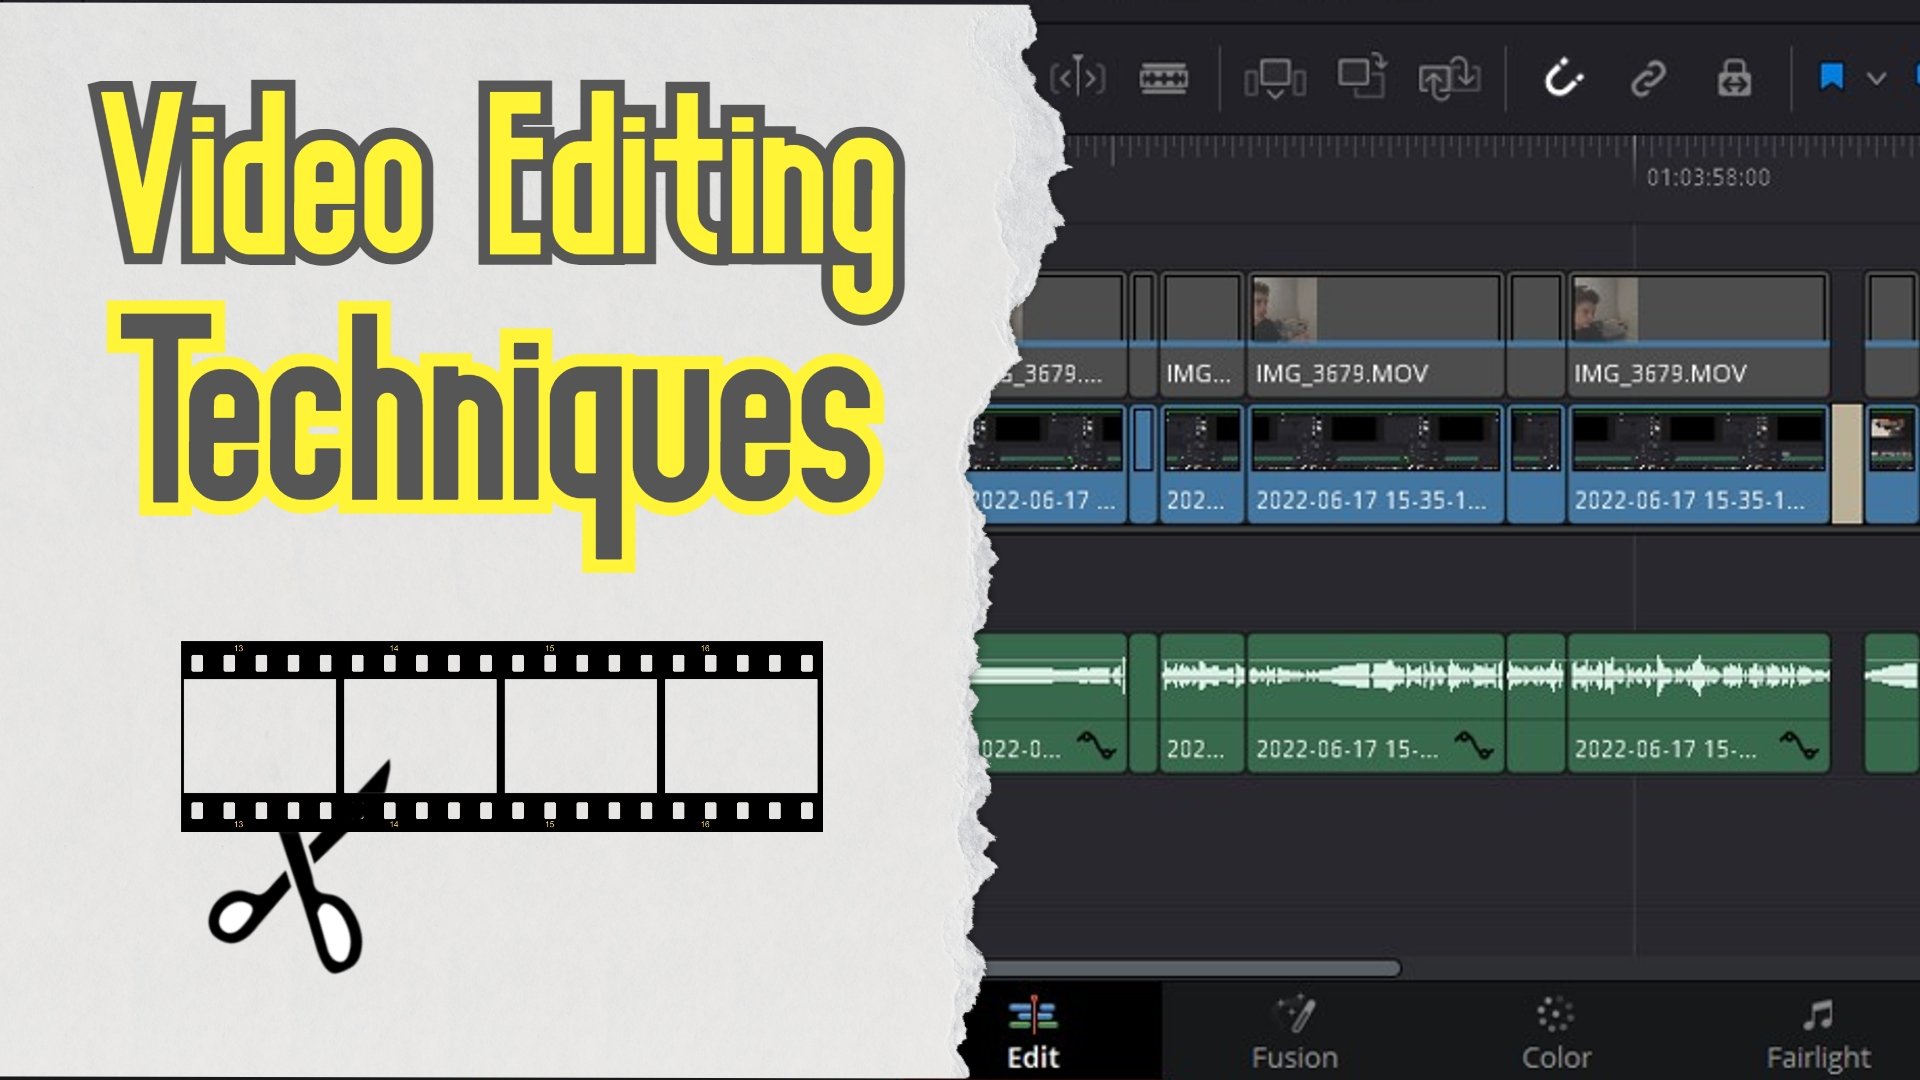 Video Editing Techniques: Edit different video formats